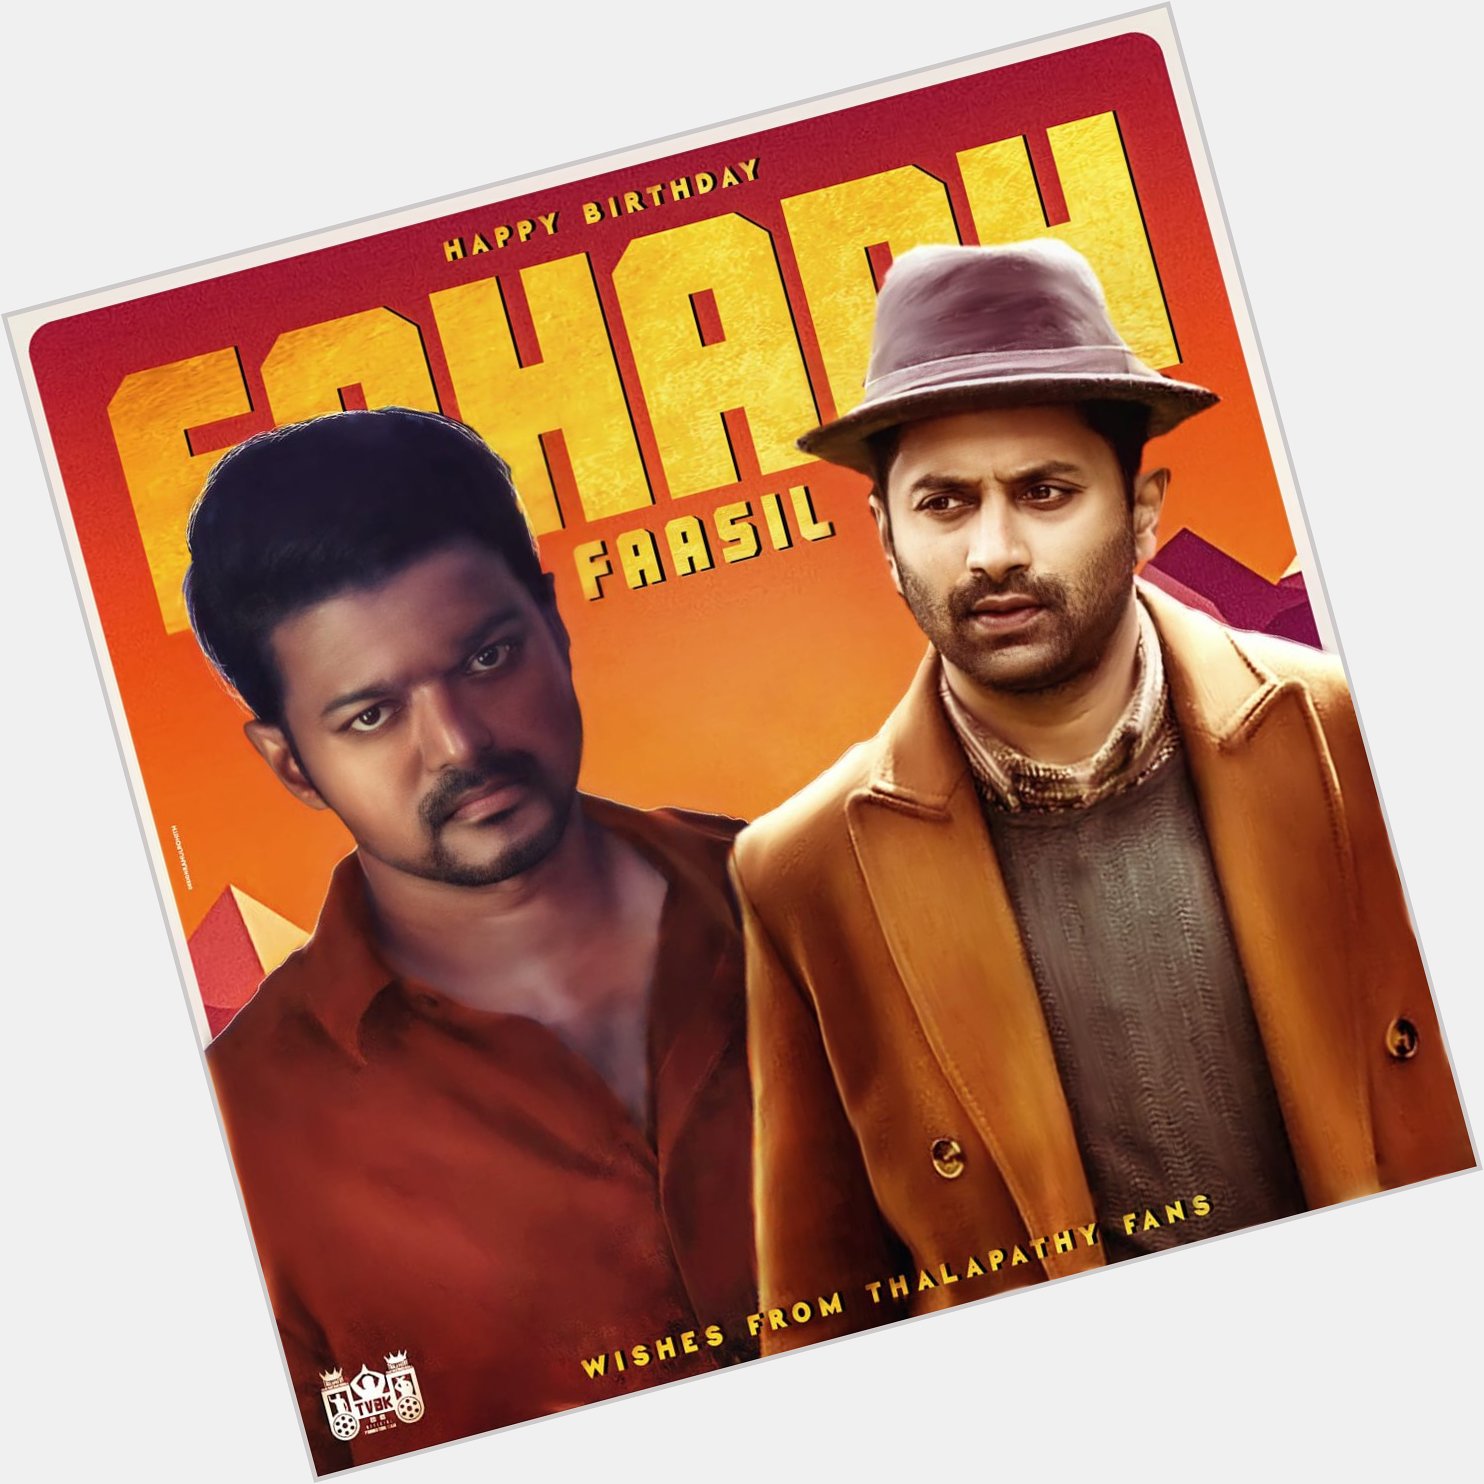 HAPPY BIRTHDAY FAHADH FAASIL     WISHES FROM THALAPATHY BLOODS 